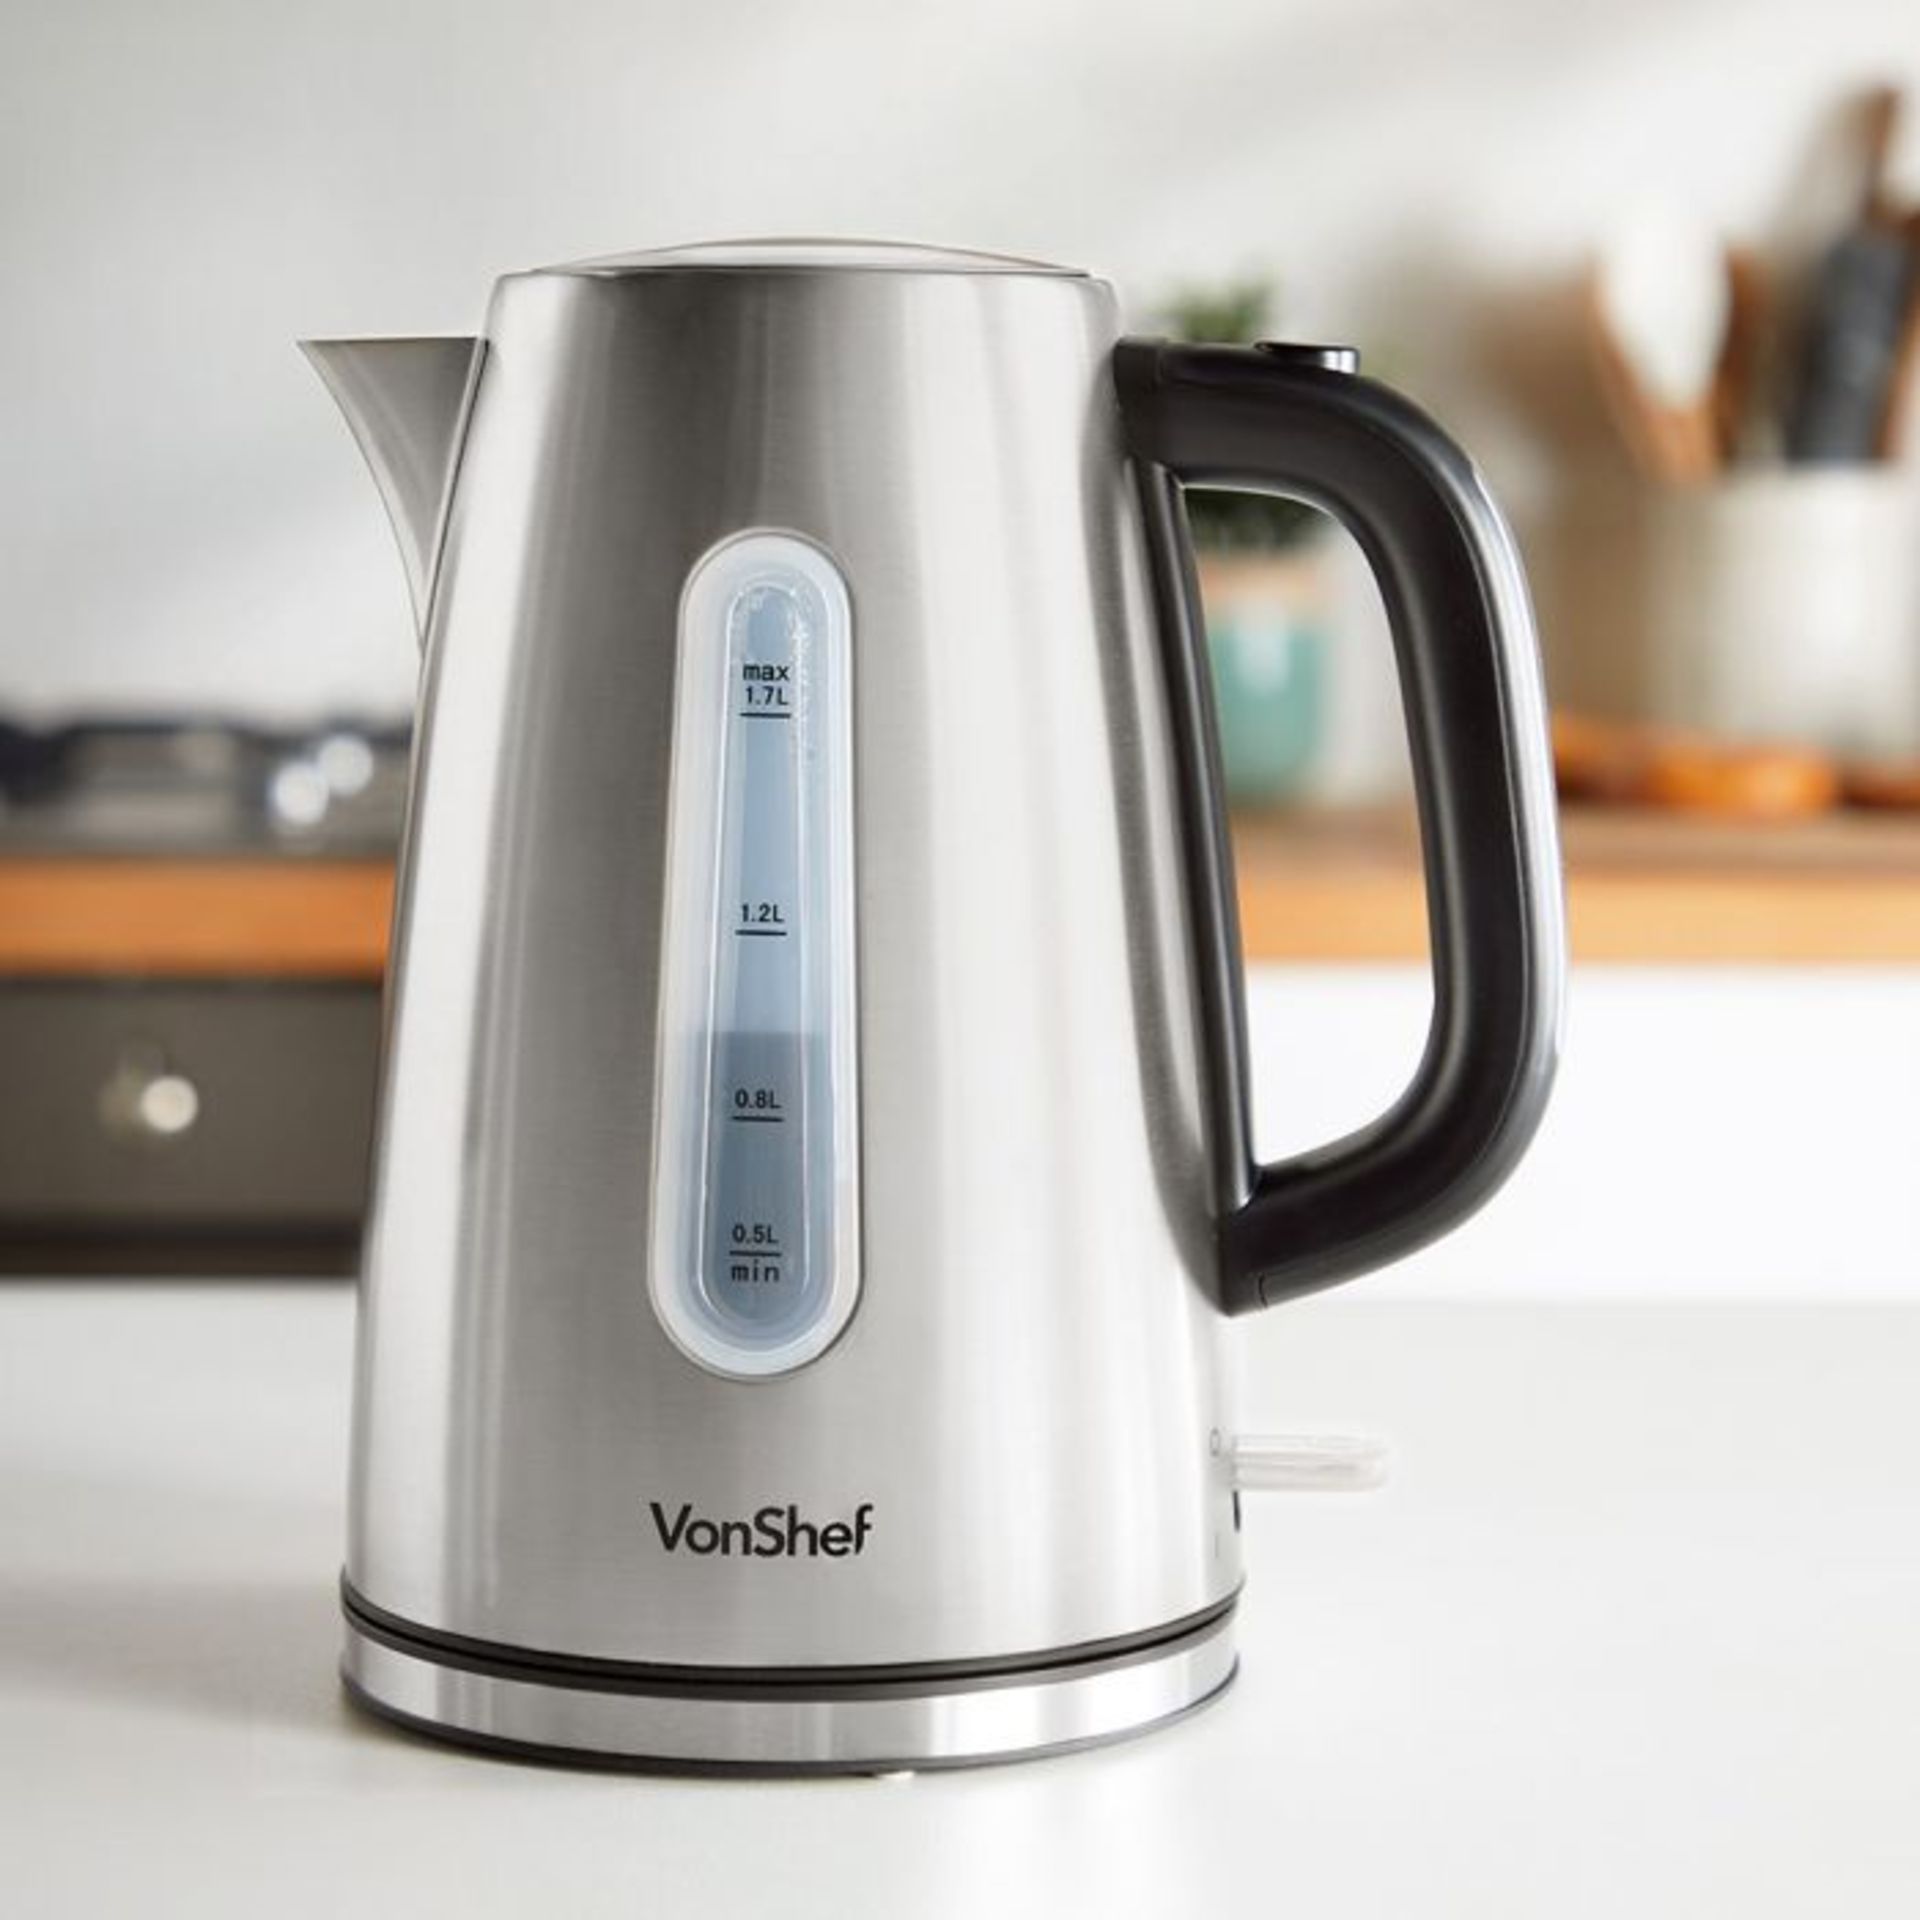 (V316) 1.7L Stainless Steel Kettle Quick boil time: 1.7L/7 cups in 5 minutes Easily remove th...